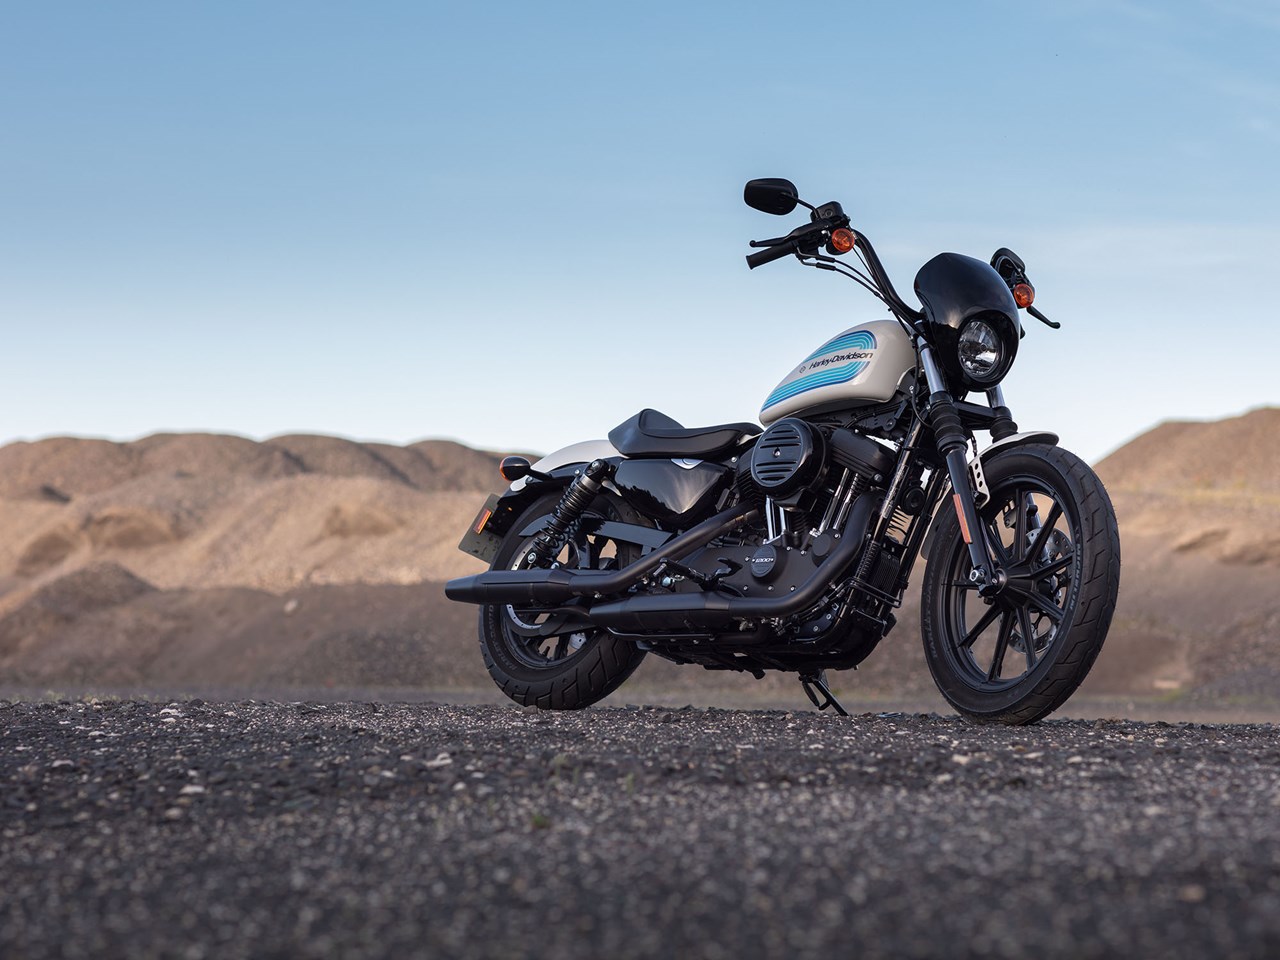 HARLEY-DAVIDSON SPORTSTER 1200 Iron (2018-2021) Review